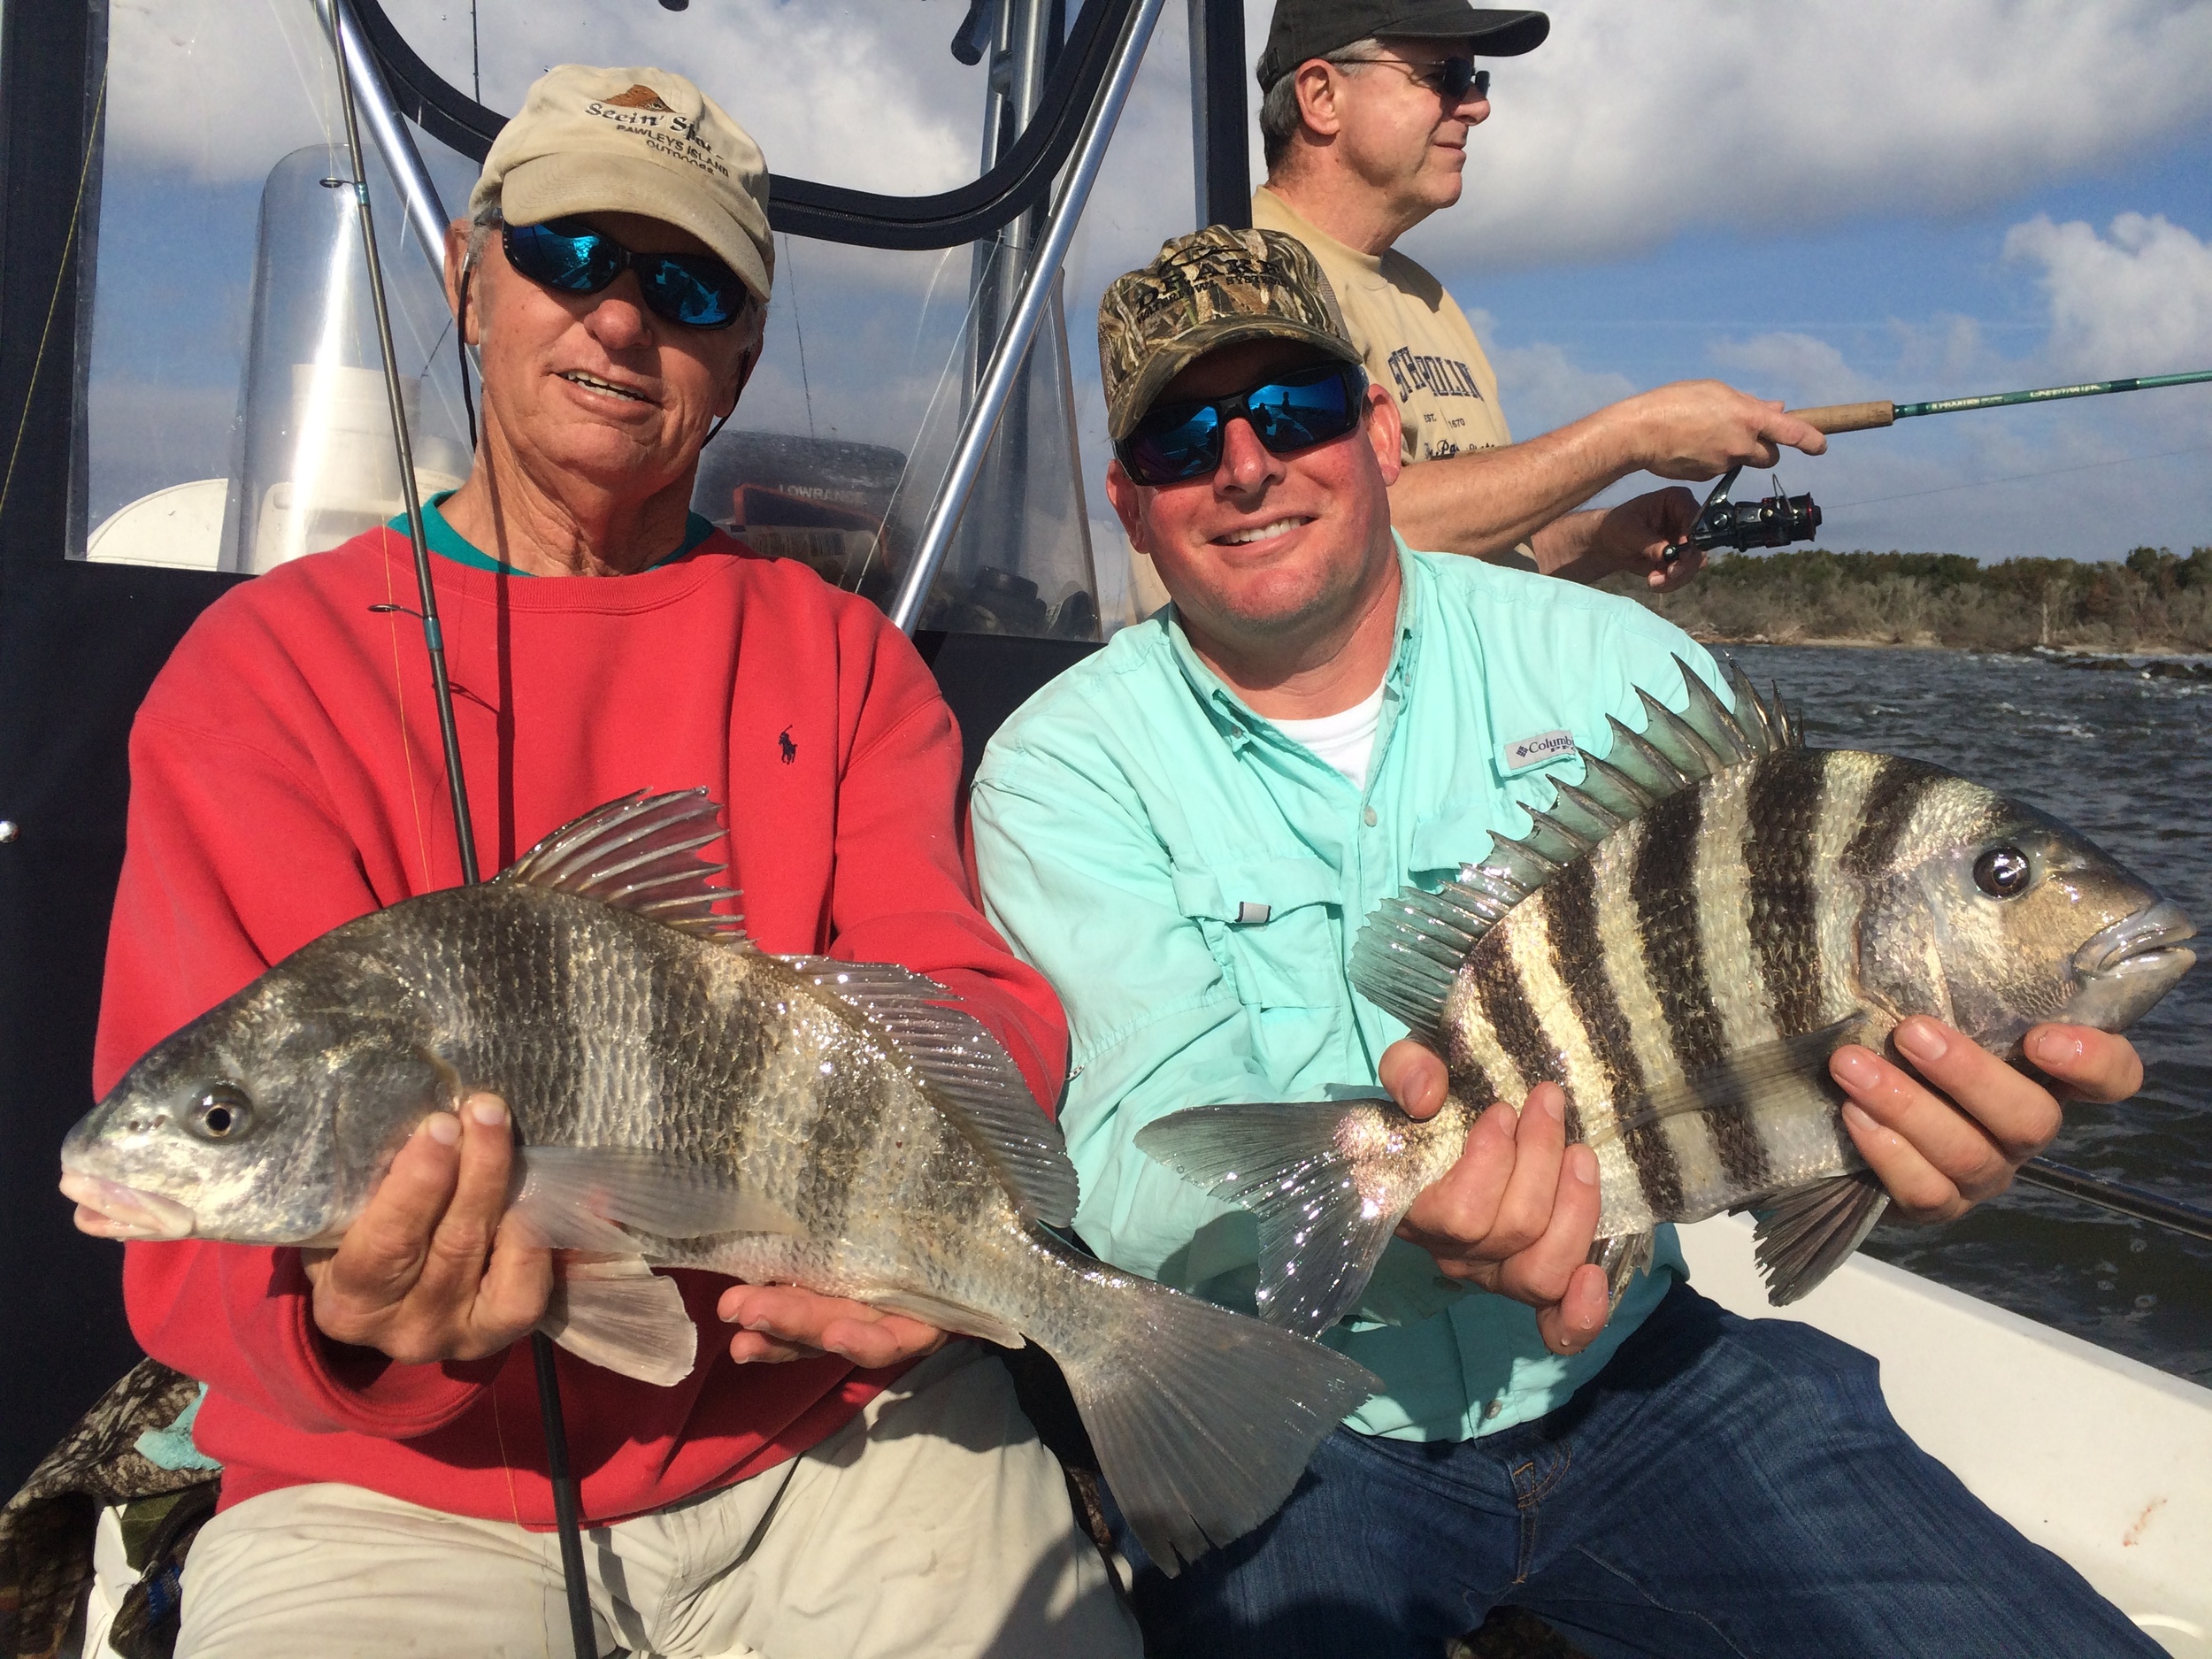   Fishing Charters    Learn More  